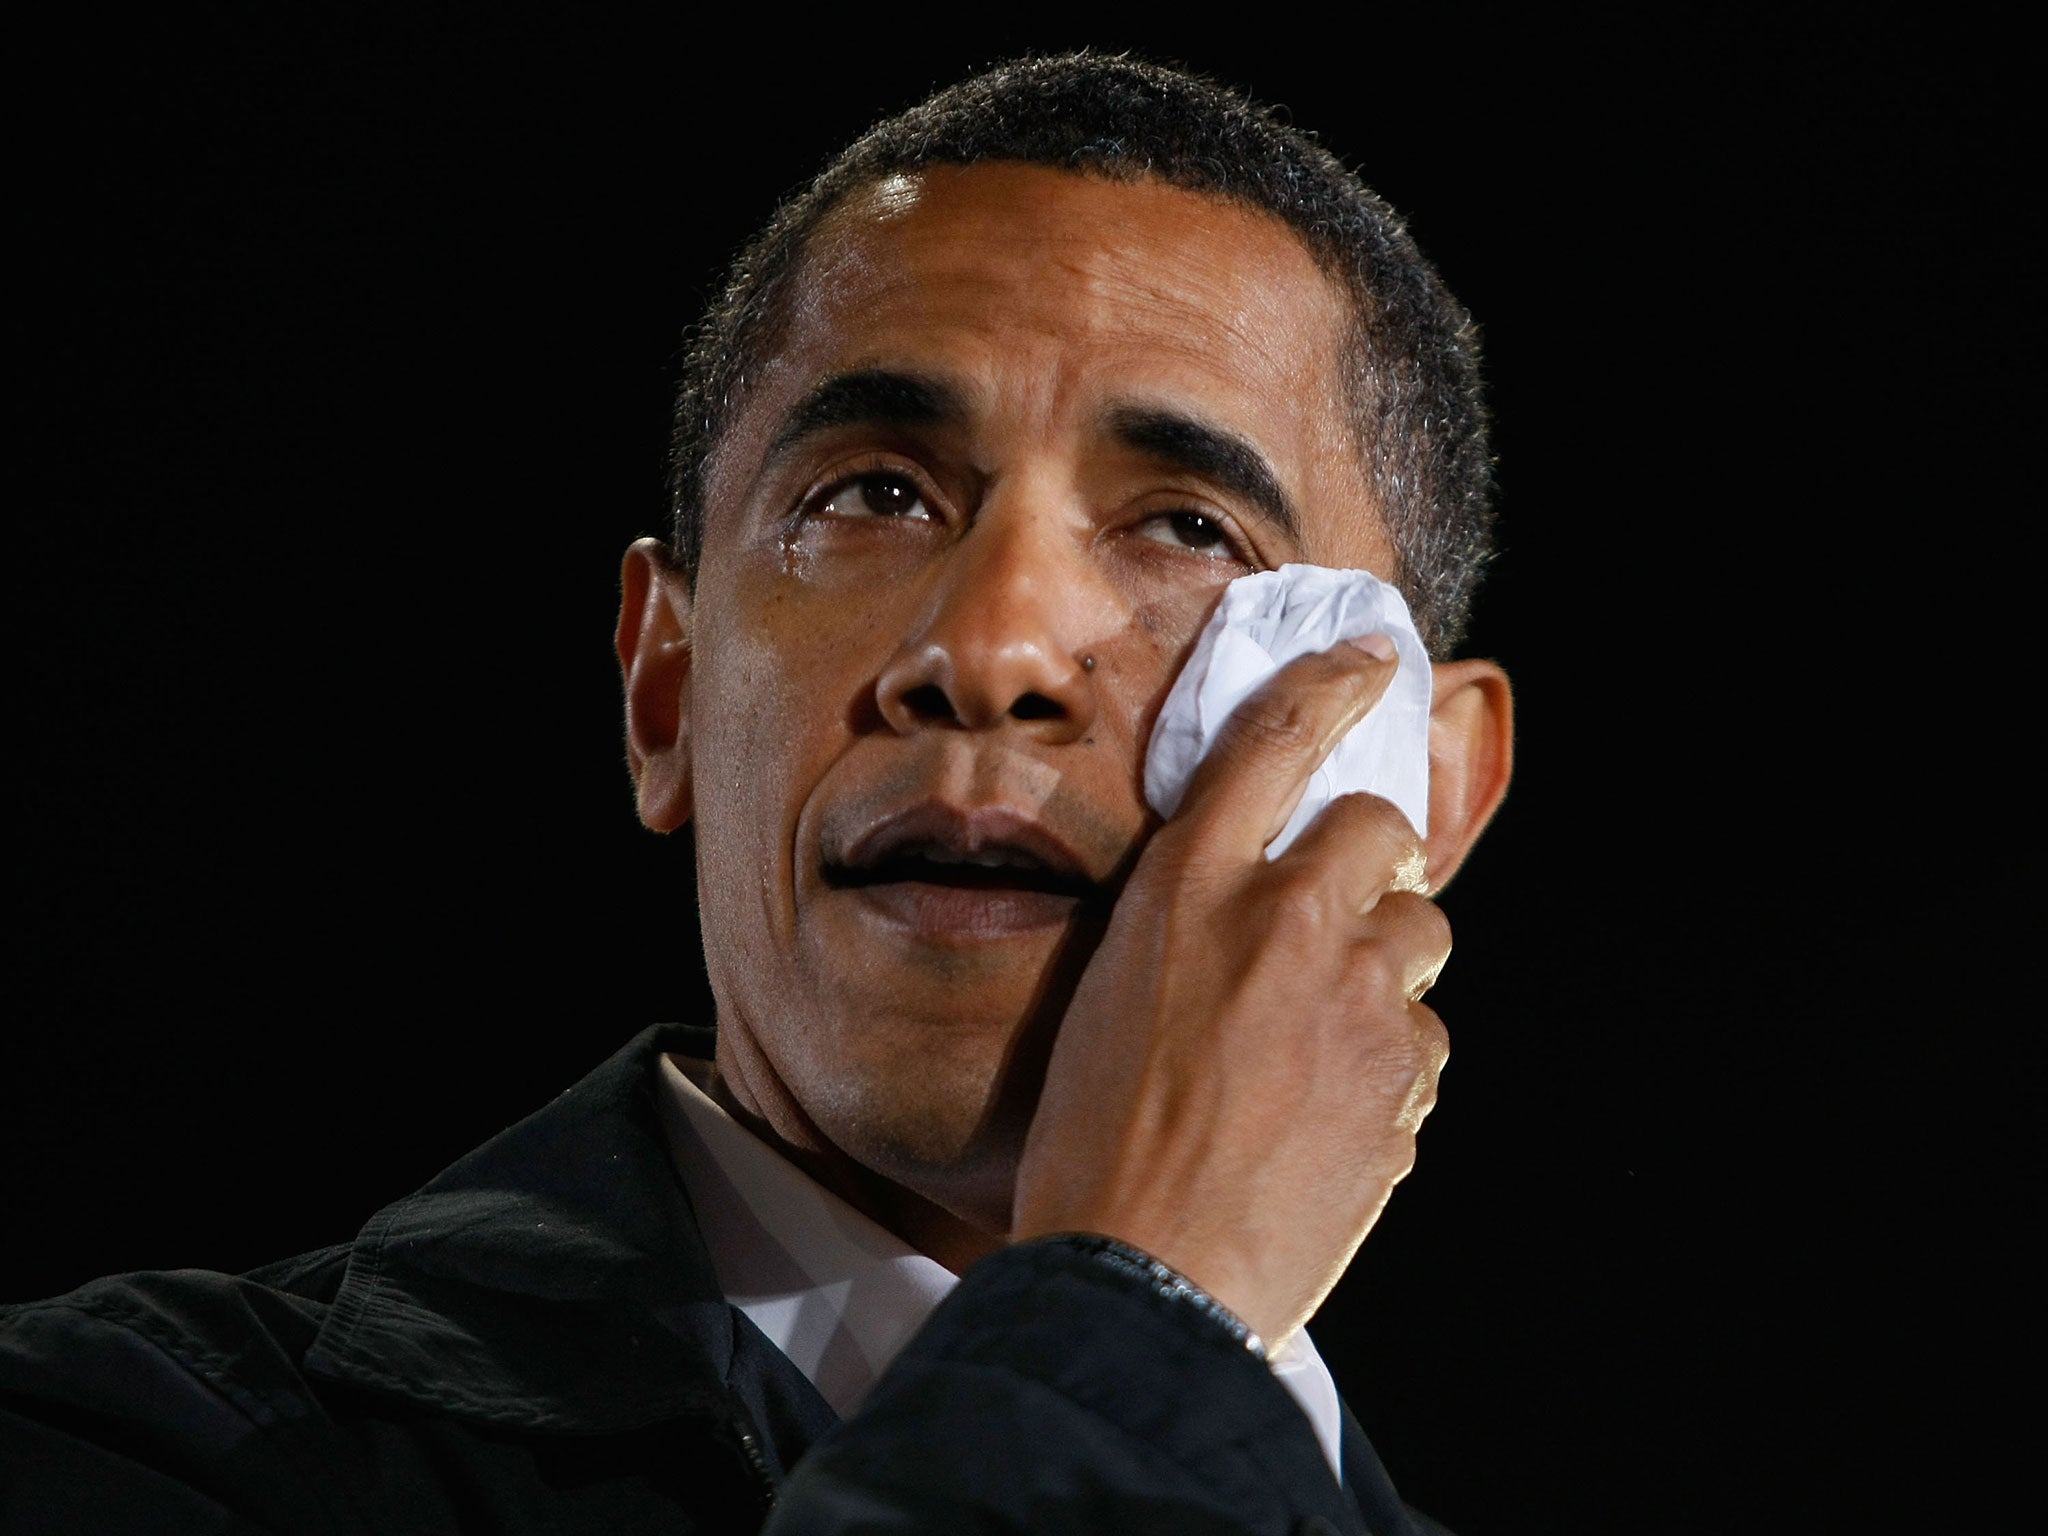 Barack Obama wipes away tears as he cries while speaking about his grandmother during a rally at University of North Carolina on November 3, 2008